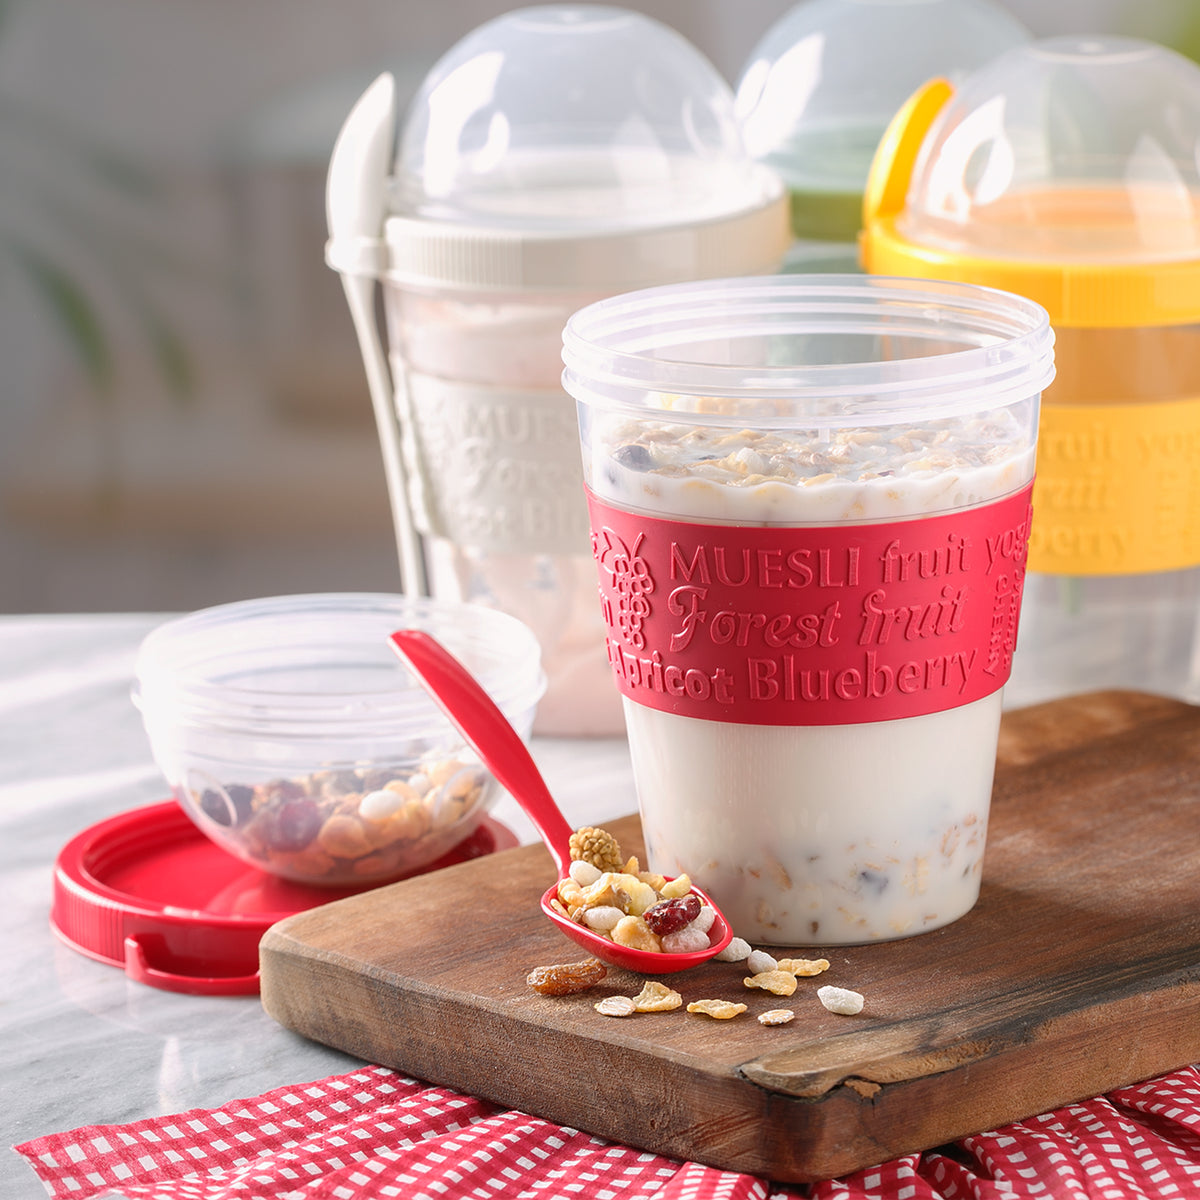 American Yogurt Cup Reusable 12 oz. with Lid Top Compartment